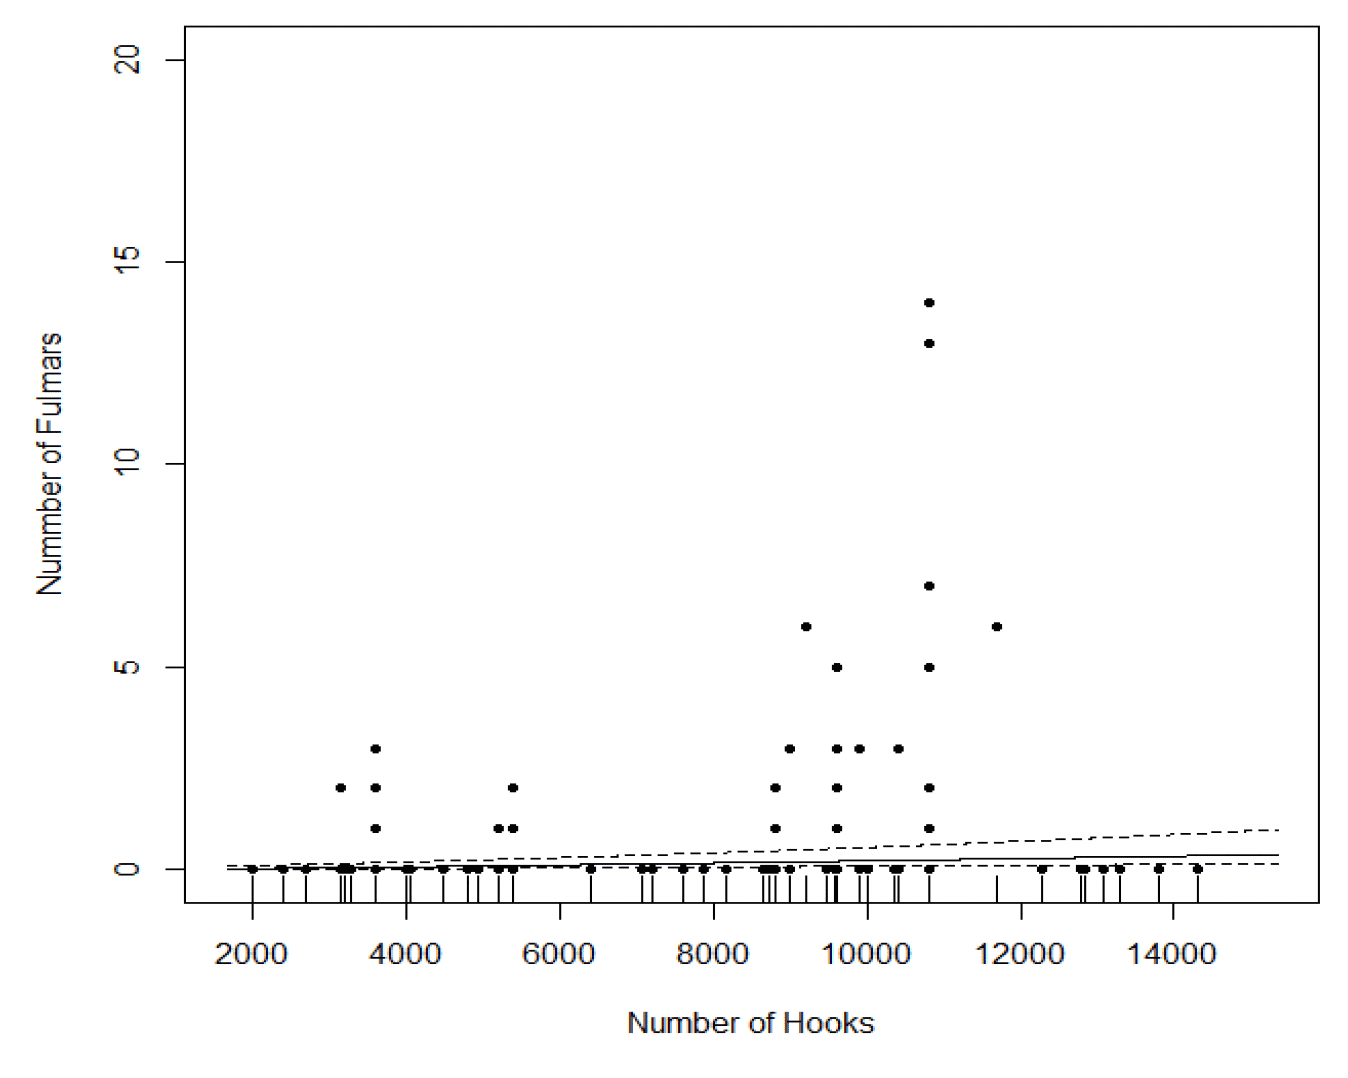 The GAMM model predicted number of fulmars caught is very poorly correlated with the number of hooks being used.